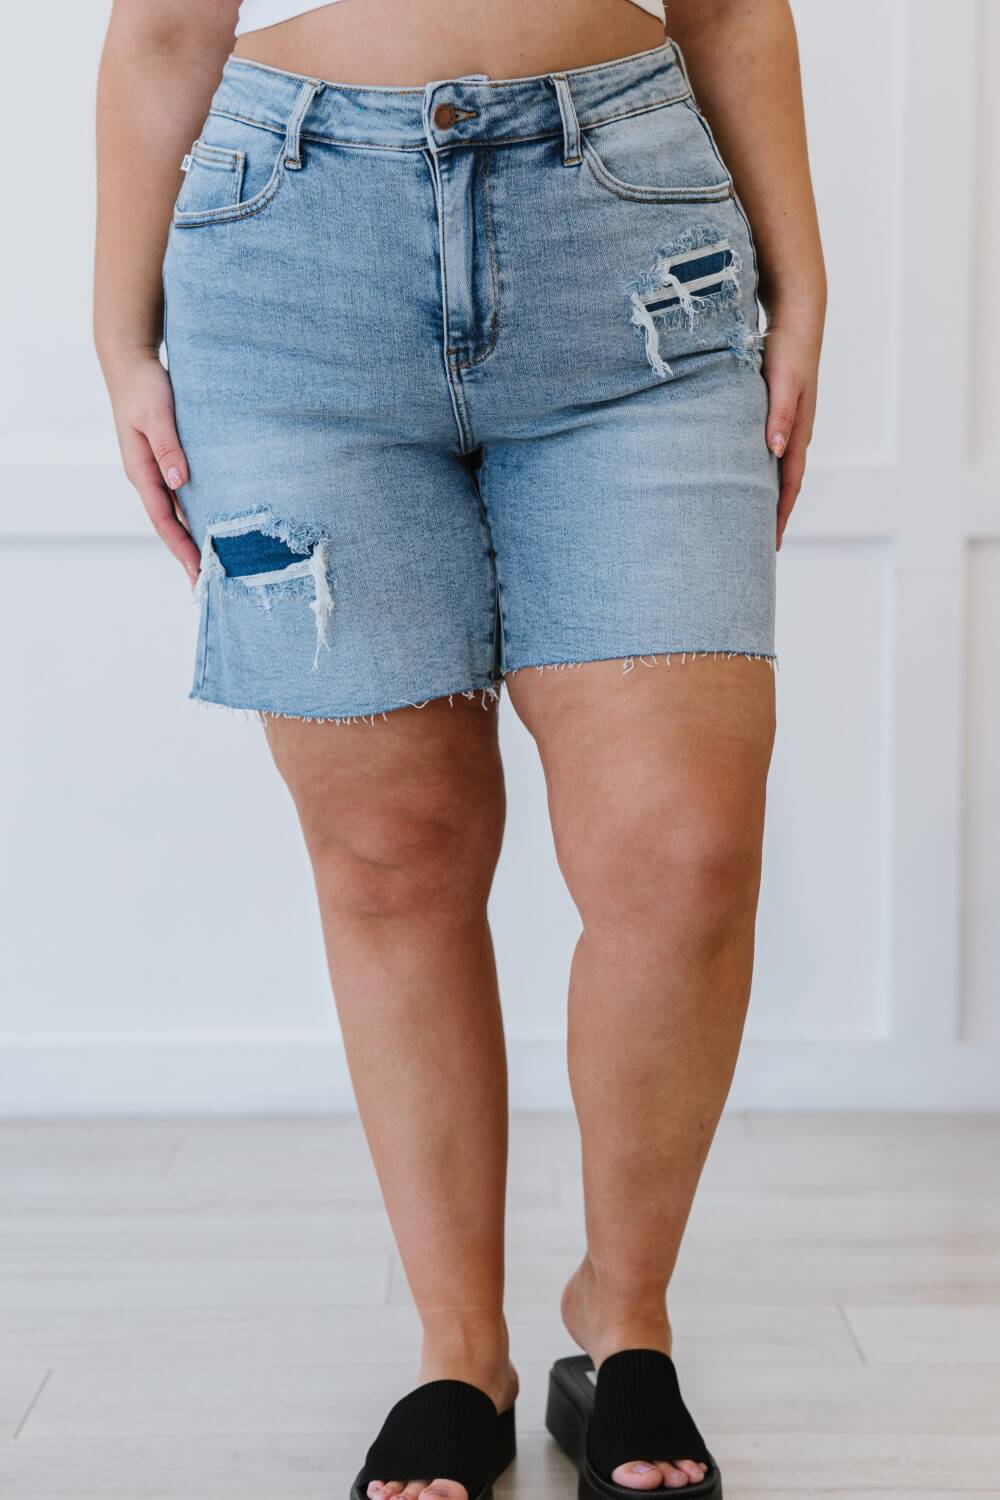 Plus Size, Judy Blue, Acid Wash Denim Patch High Rise Mid Thigh Shorts. Style Number 150094